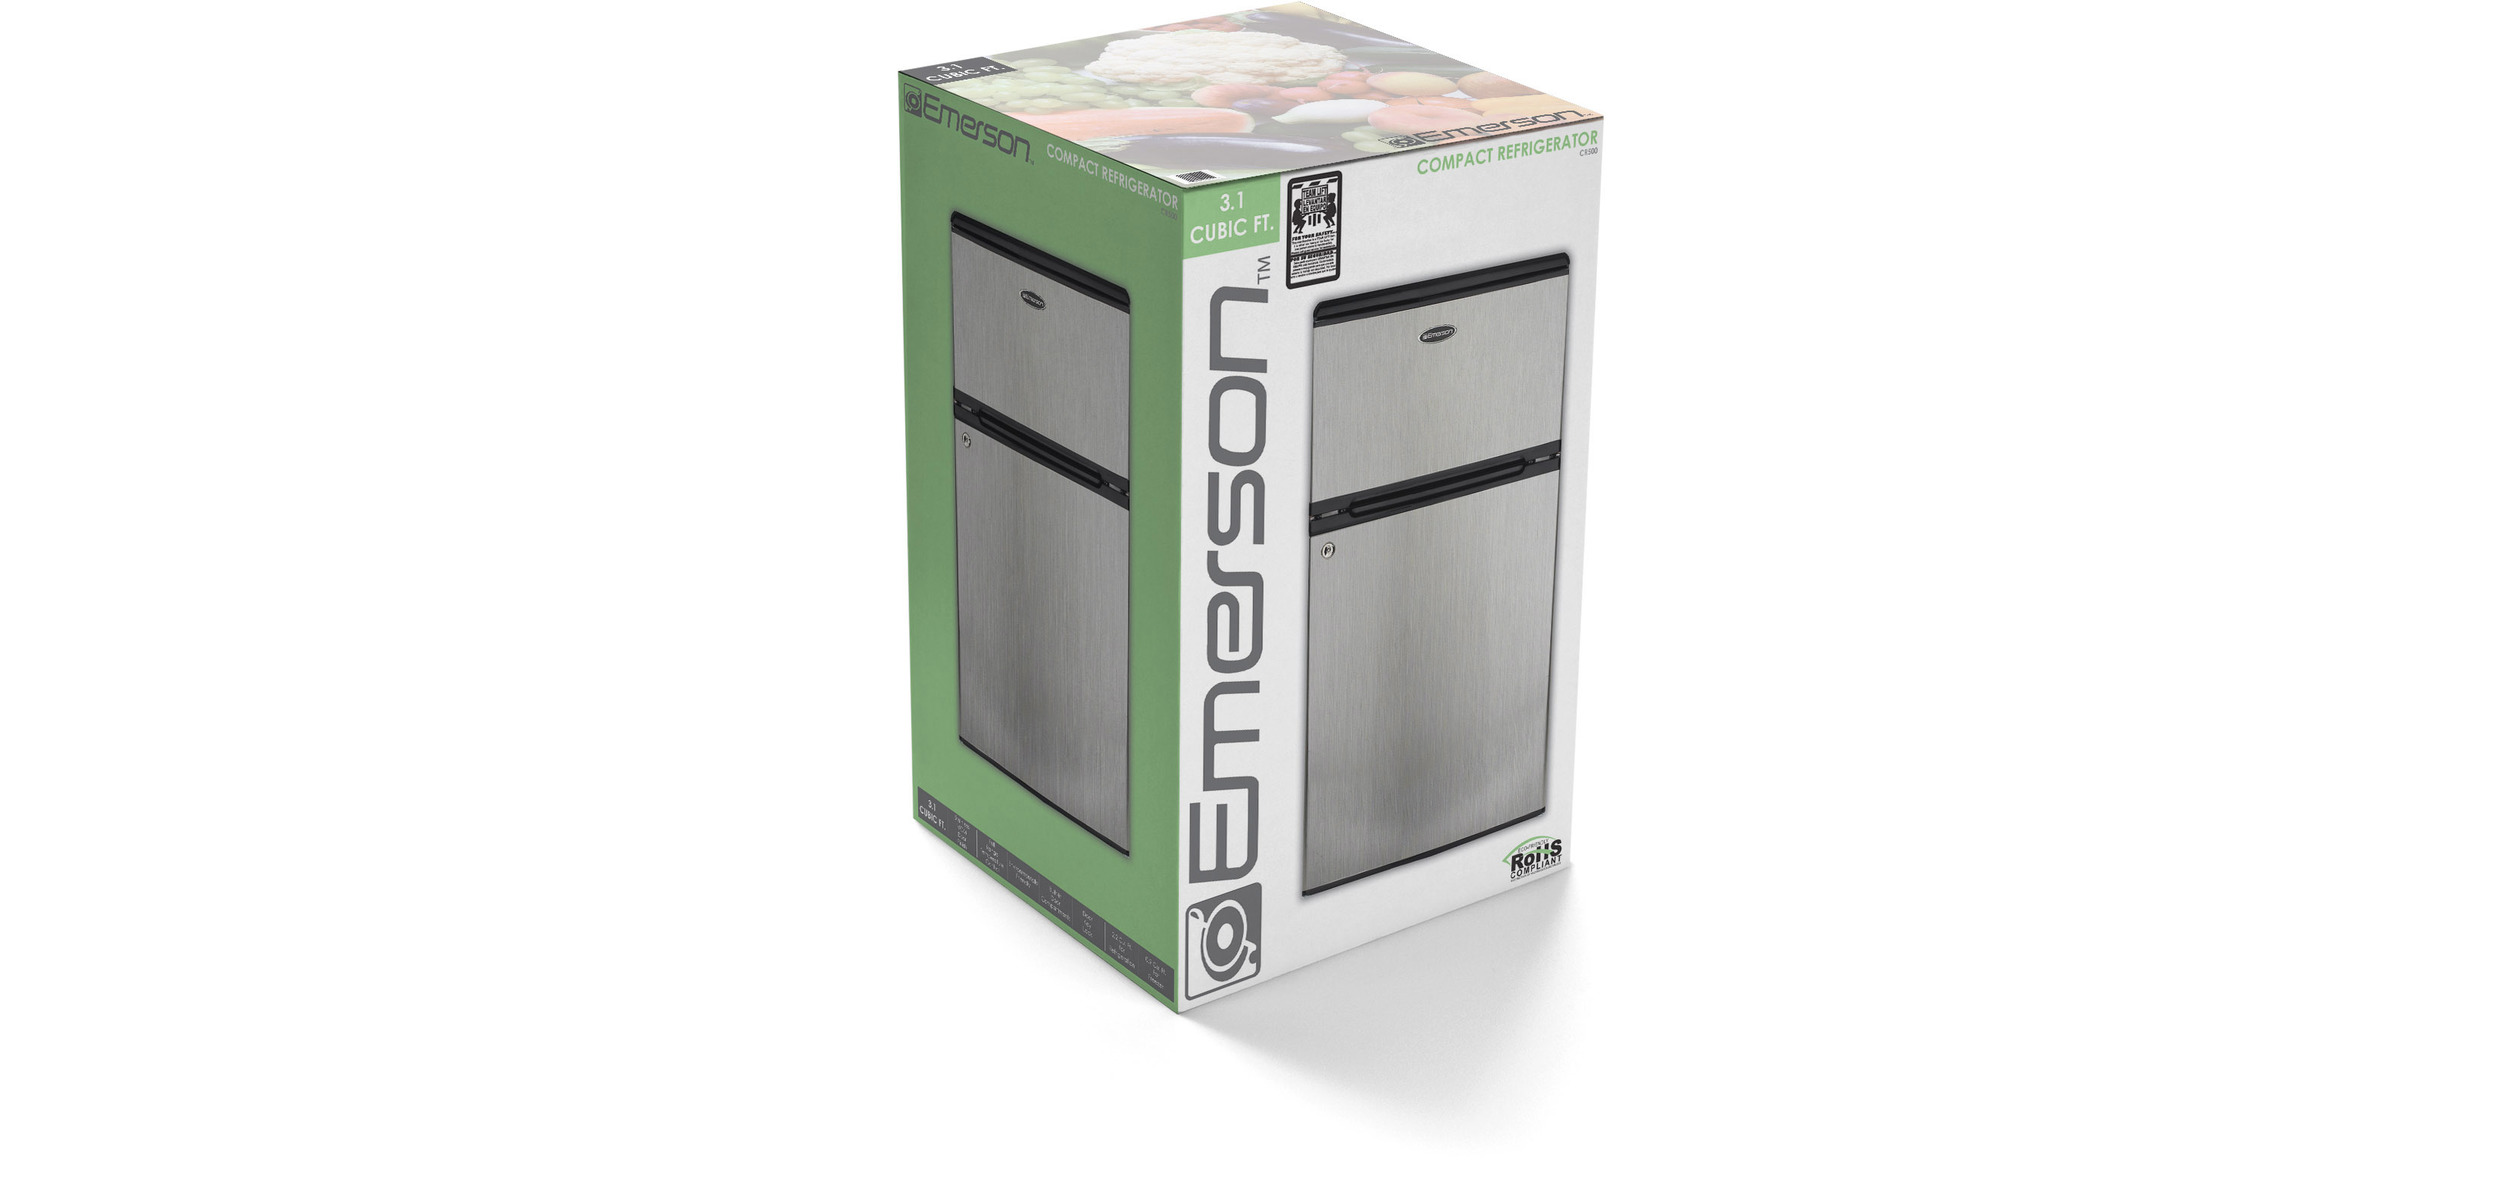 Emerson_Compact Refrigerator Packaging_Mock Up.jpg